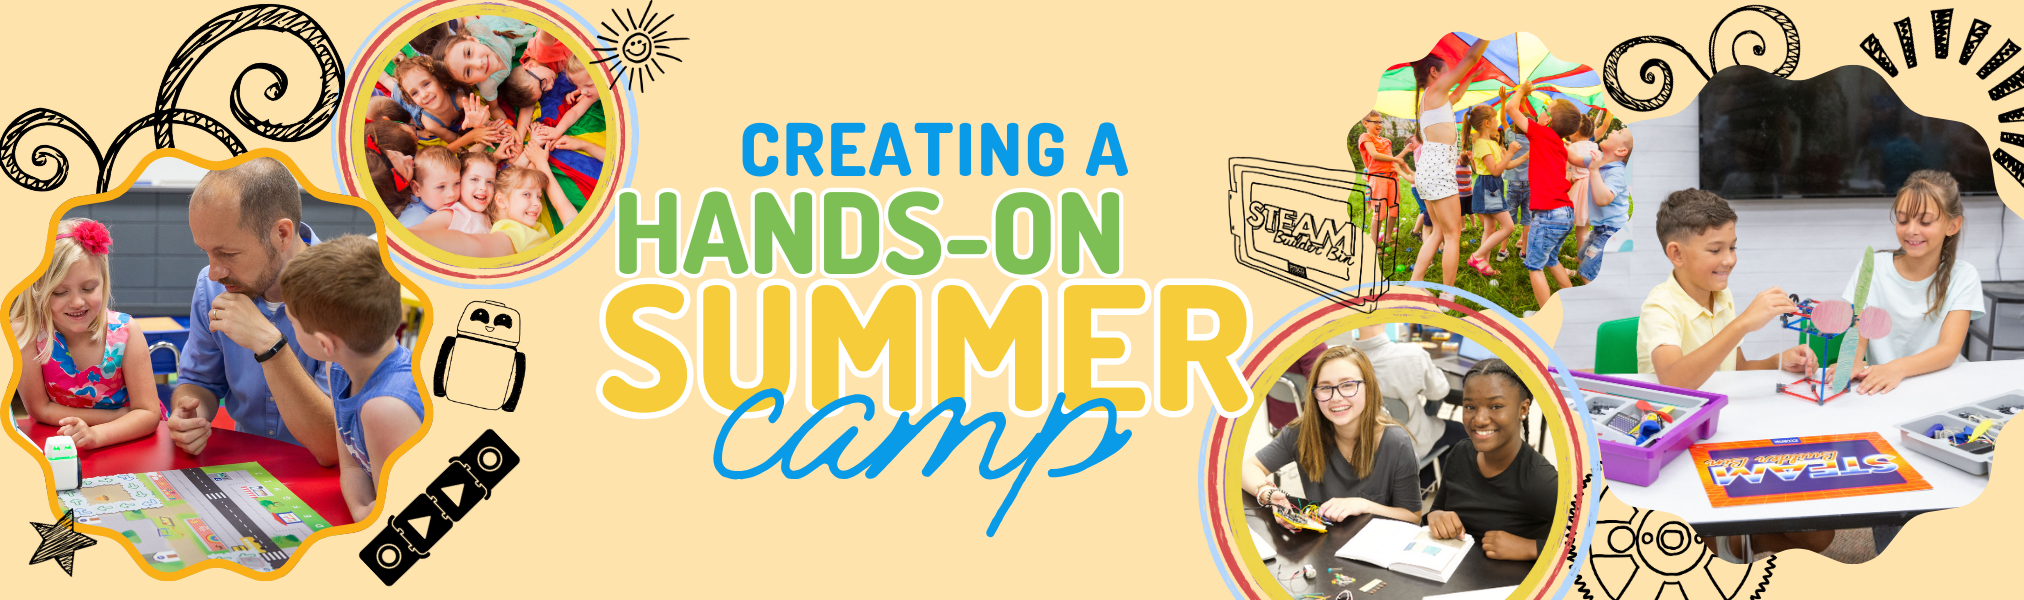 Creating a hands-on summer camp